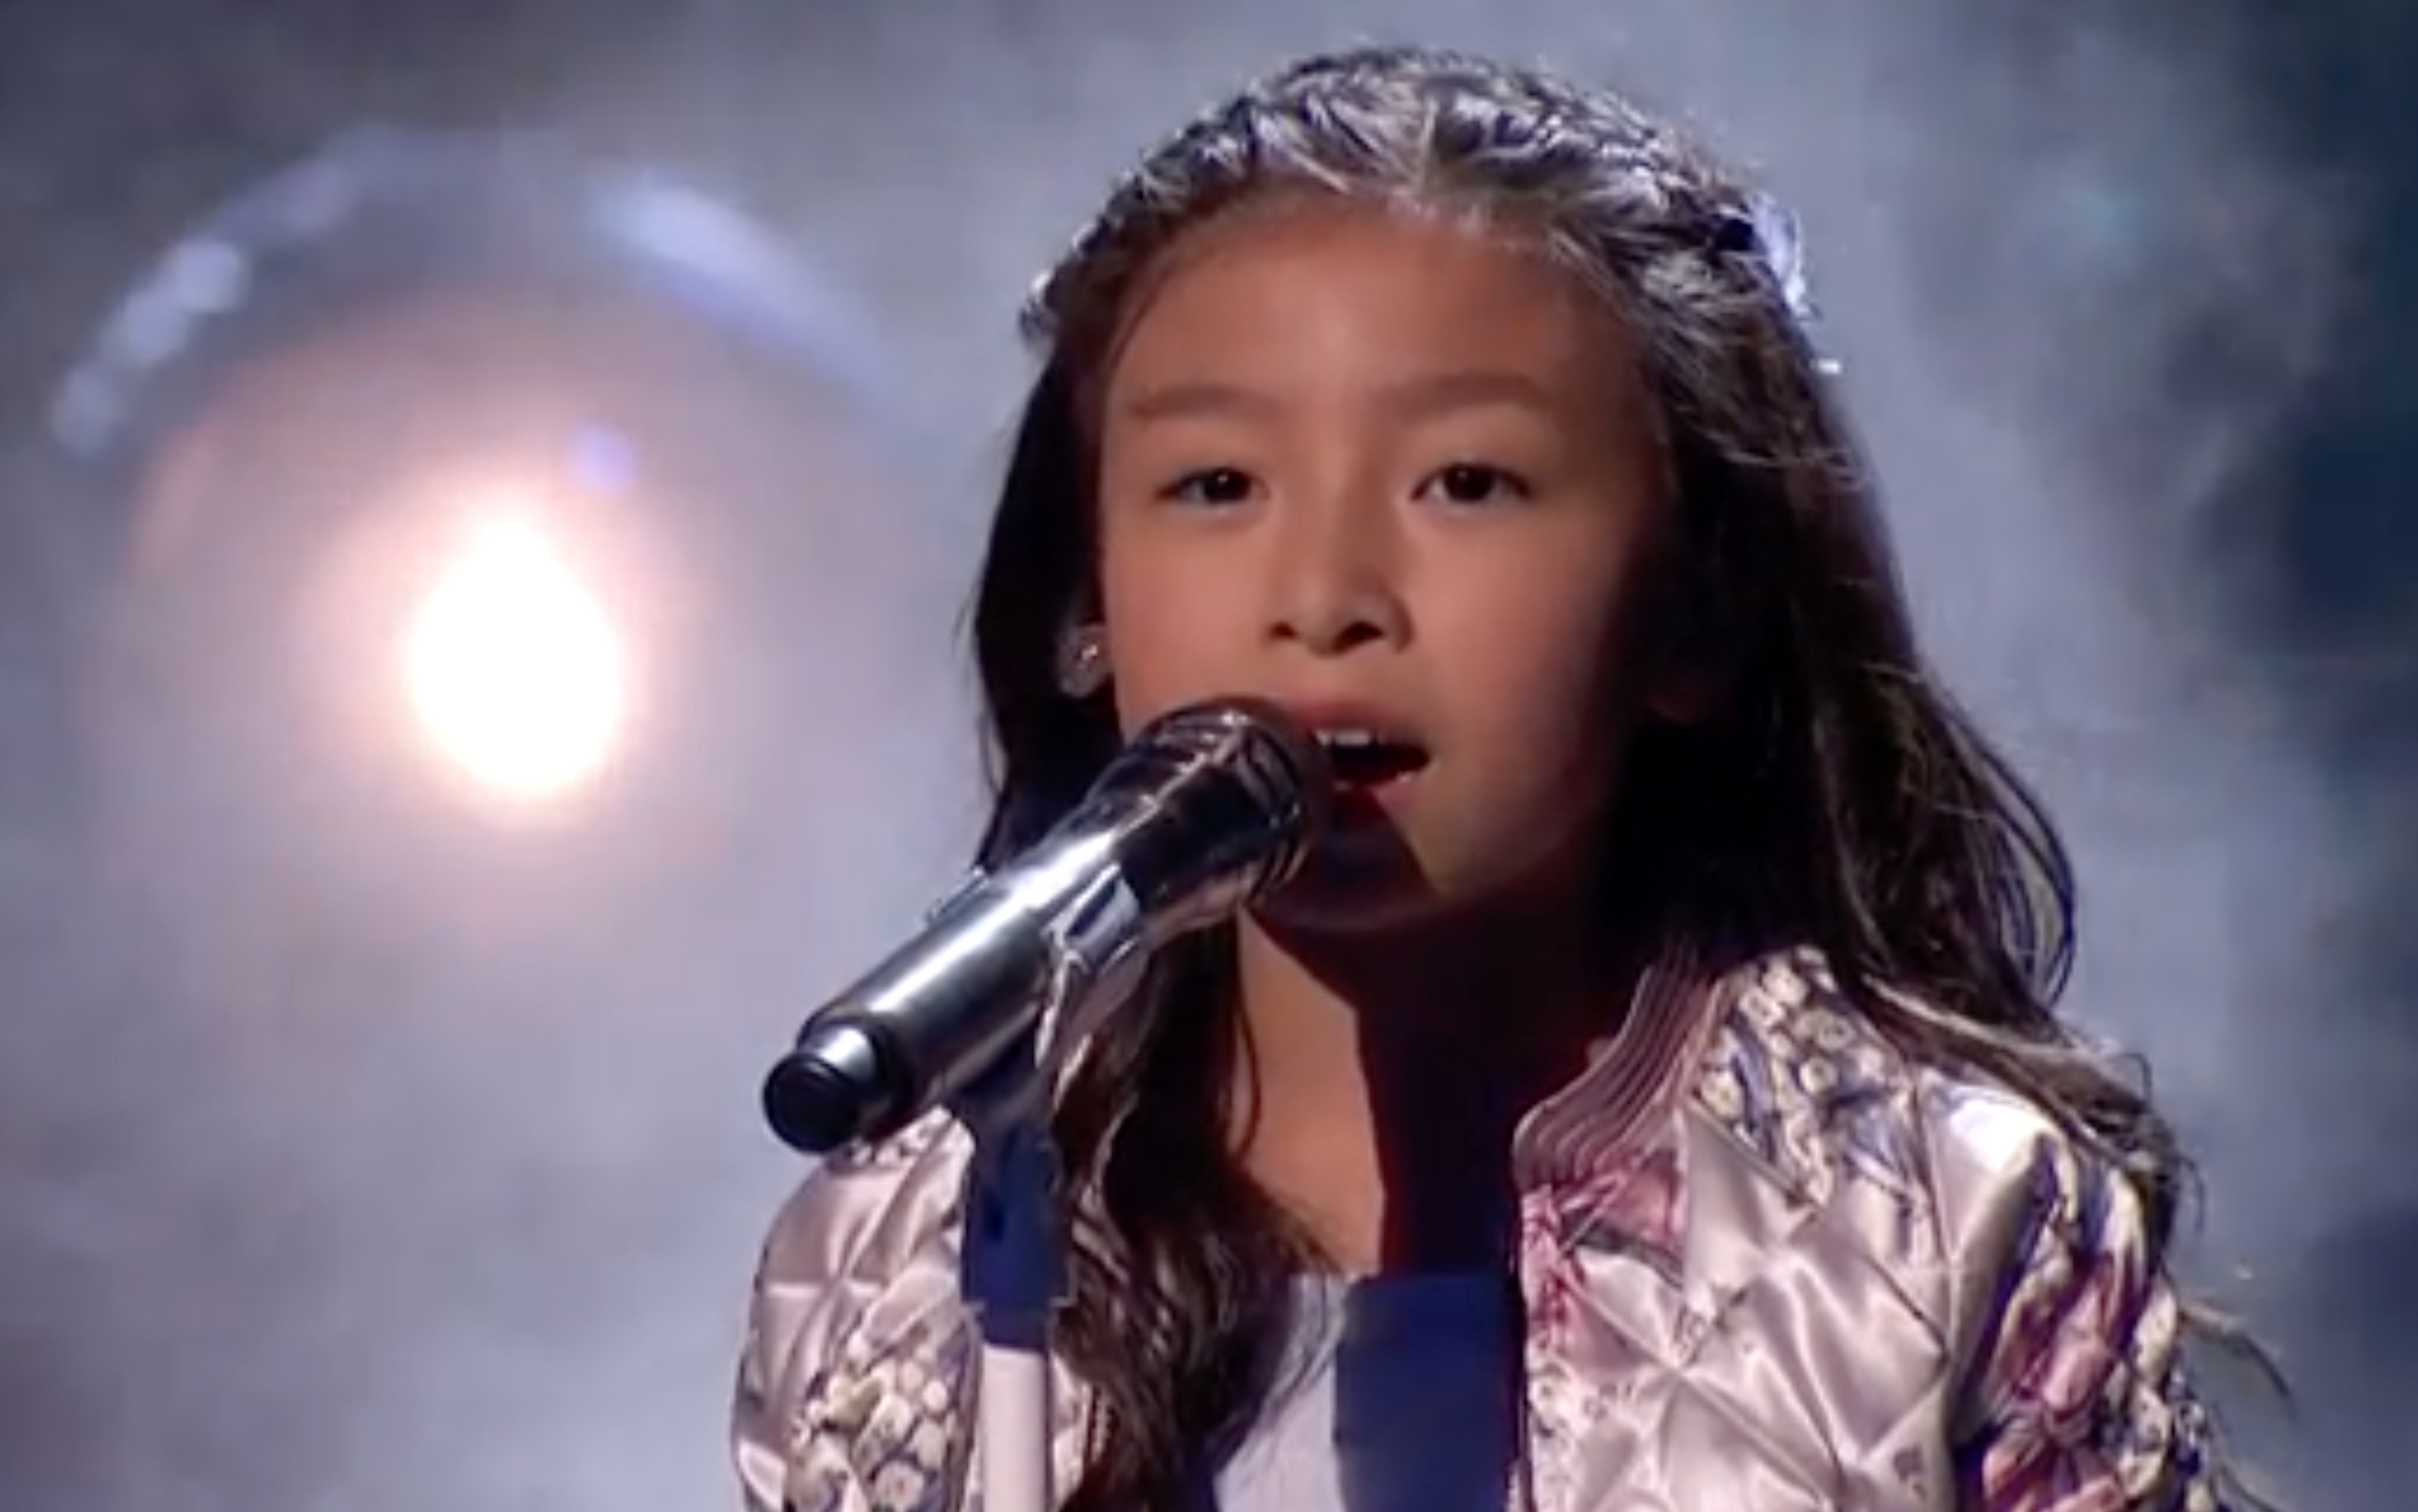 Celine Tam performs ‘How Far I'll Go’ at the America's Got Talent semi-finals. Photo: YouTube